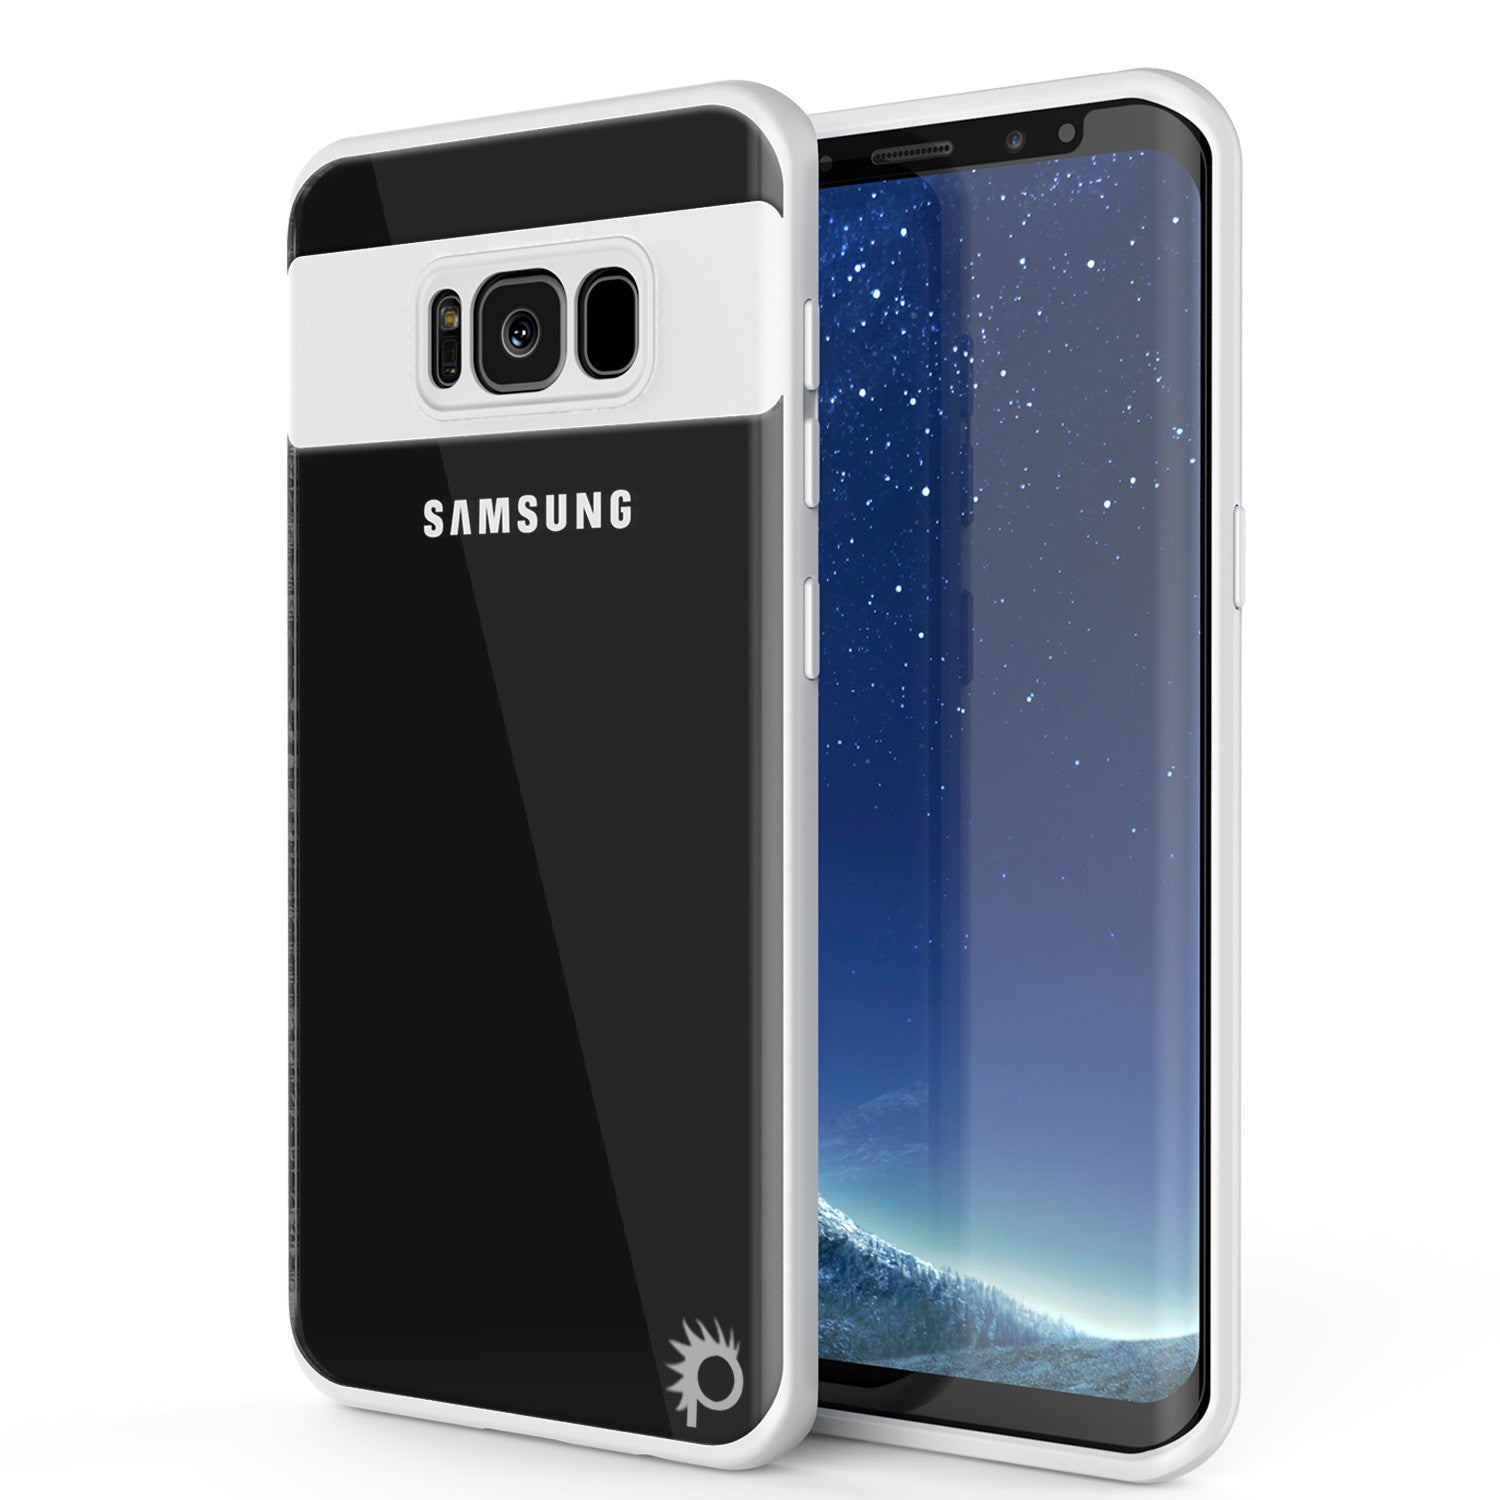 Galaxy S8 Case, Punkcase [MASK Series] [WHITE] Full Body Hybrid Dual Layer TPU Cover W/ Protective PUNKSHIELD Screen Protector